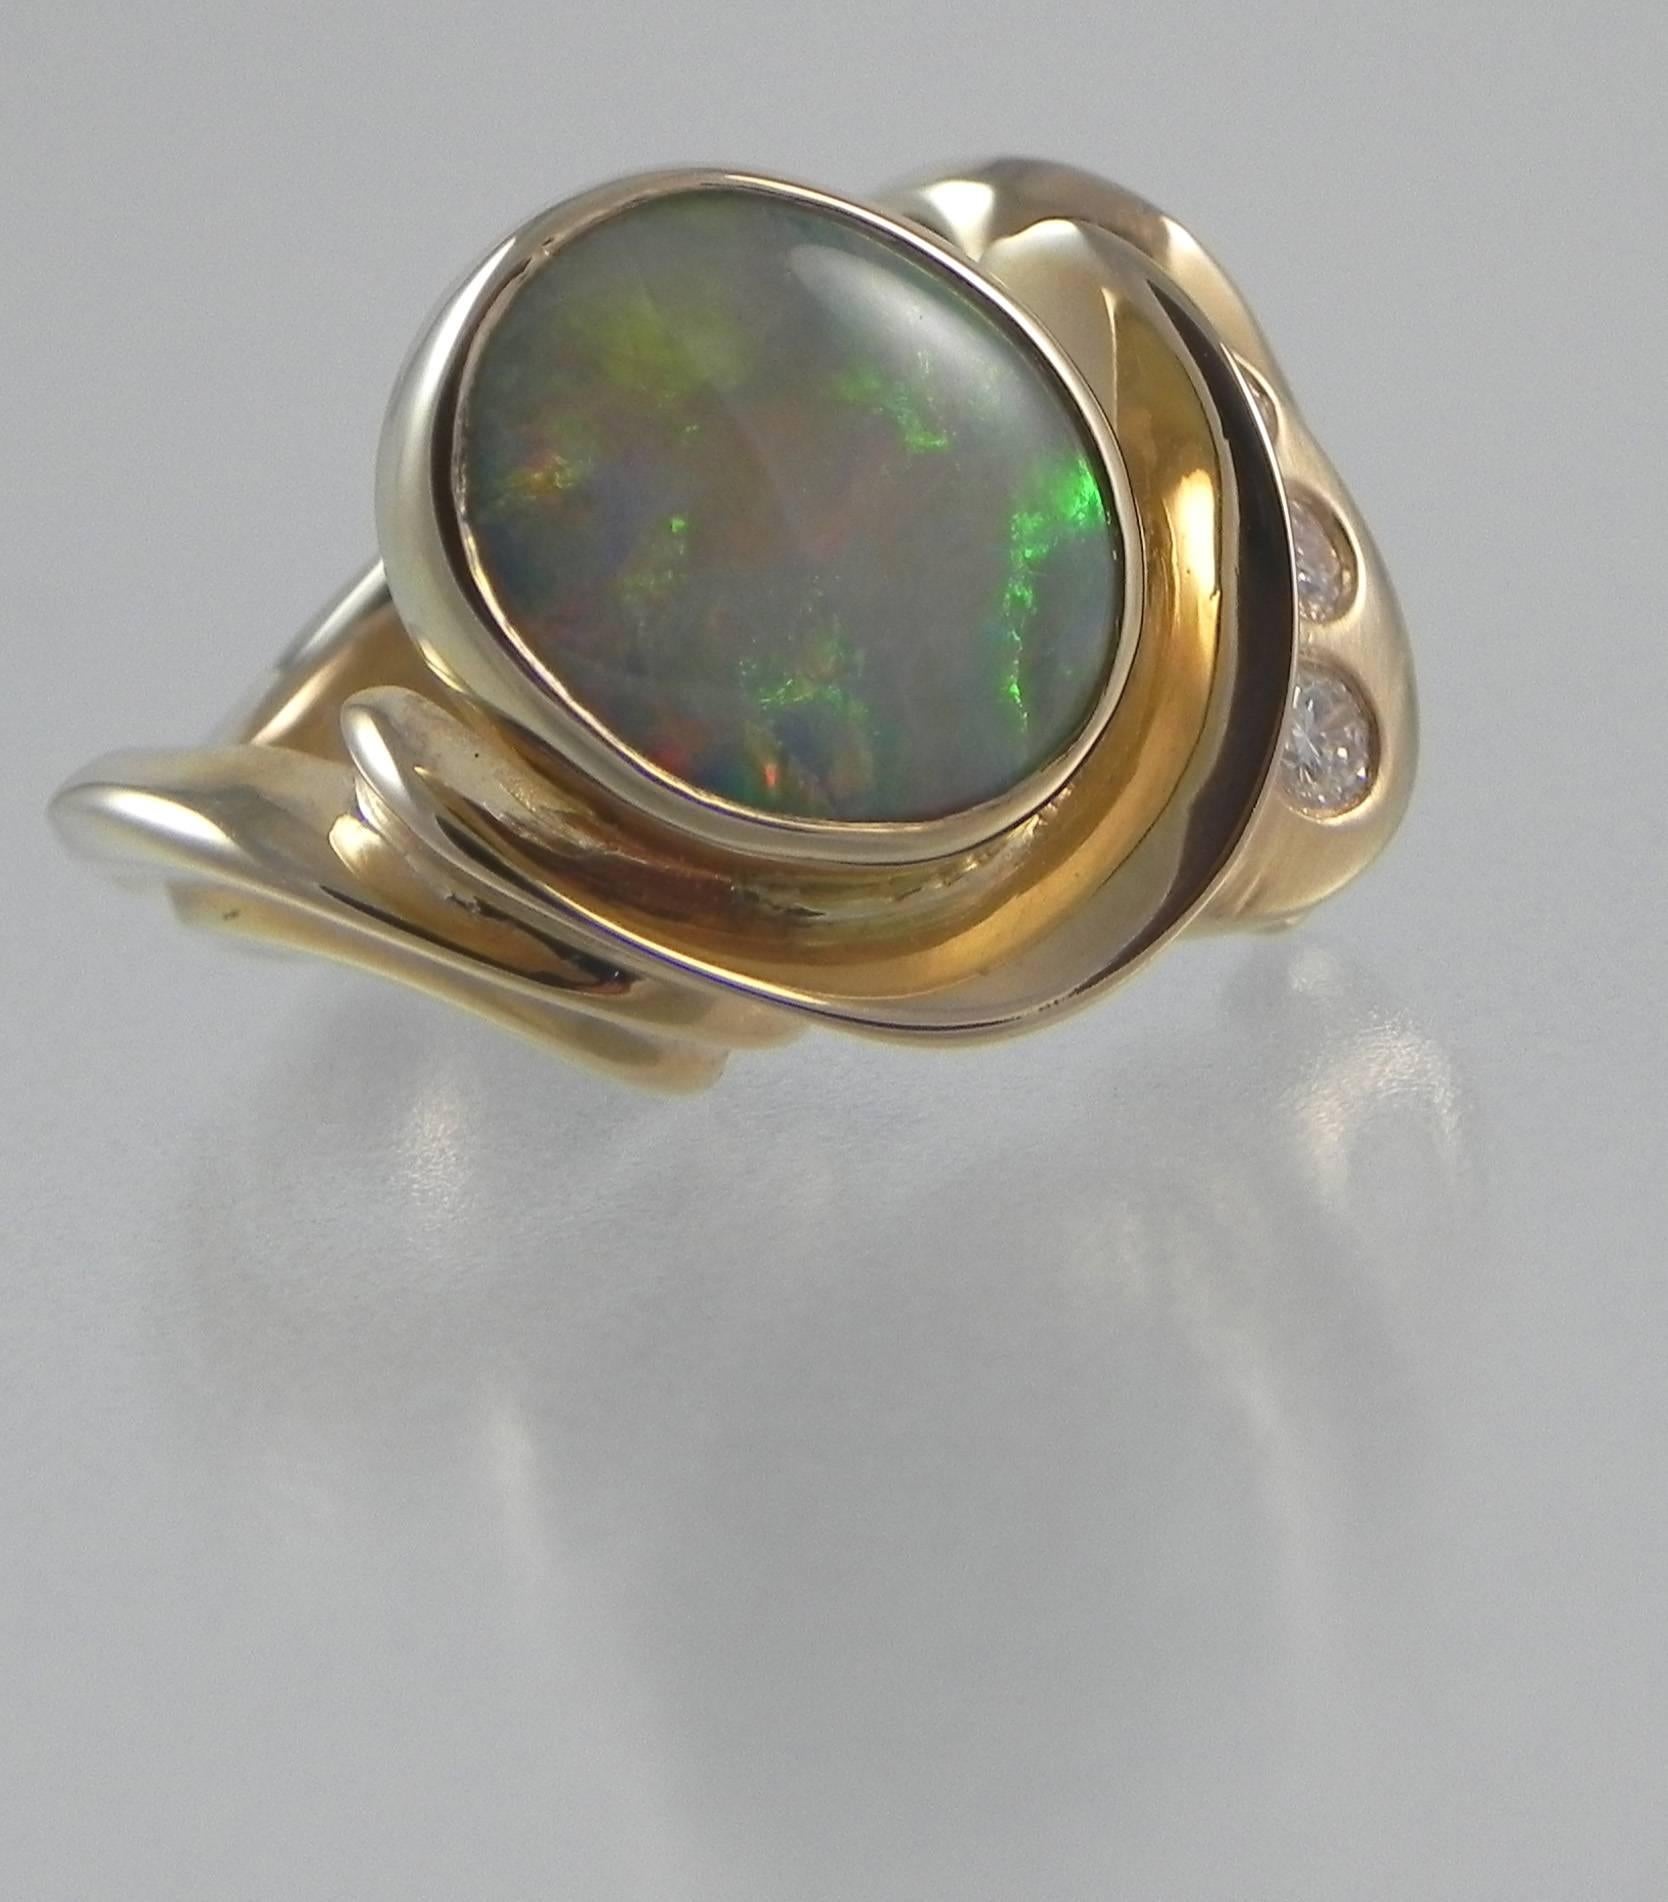 A 14Kt yellow gold one-of-a-kind ring by Colorado’s Premier Jewelry Studio and Master Craftsman – Steven M. Parks.  The ring is set with one oval cabochon fine Australian black opal that weighs 2.62 carets and set in a 14KT yellow gold handmade